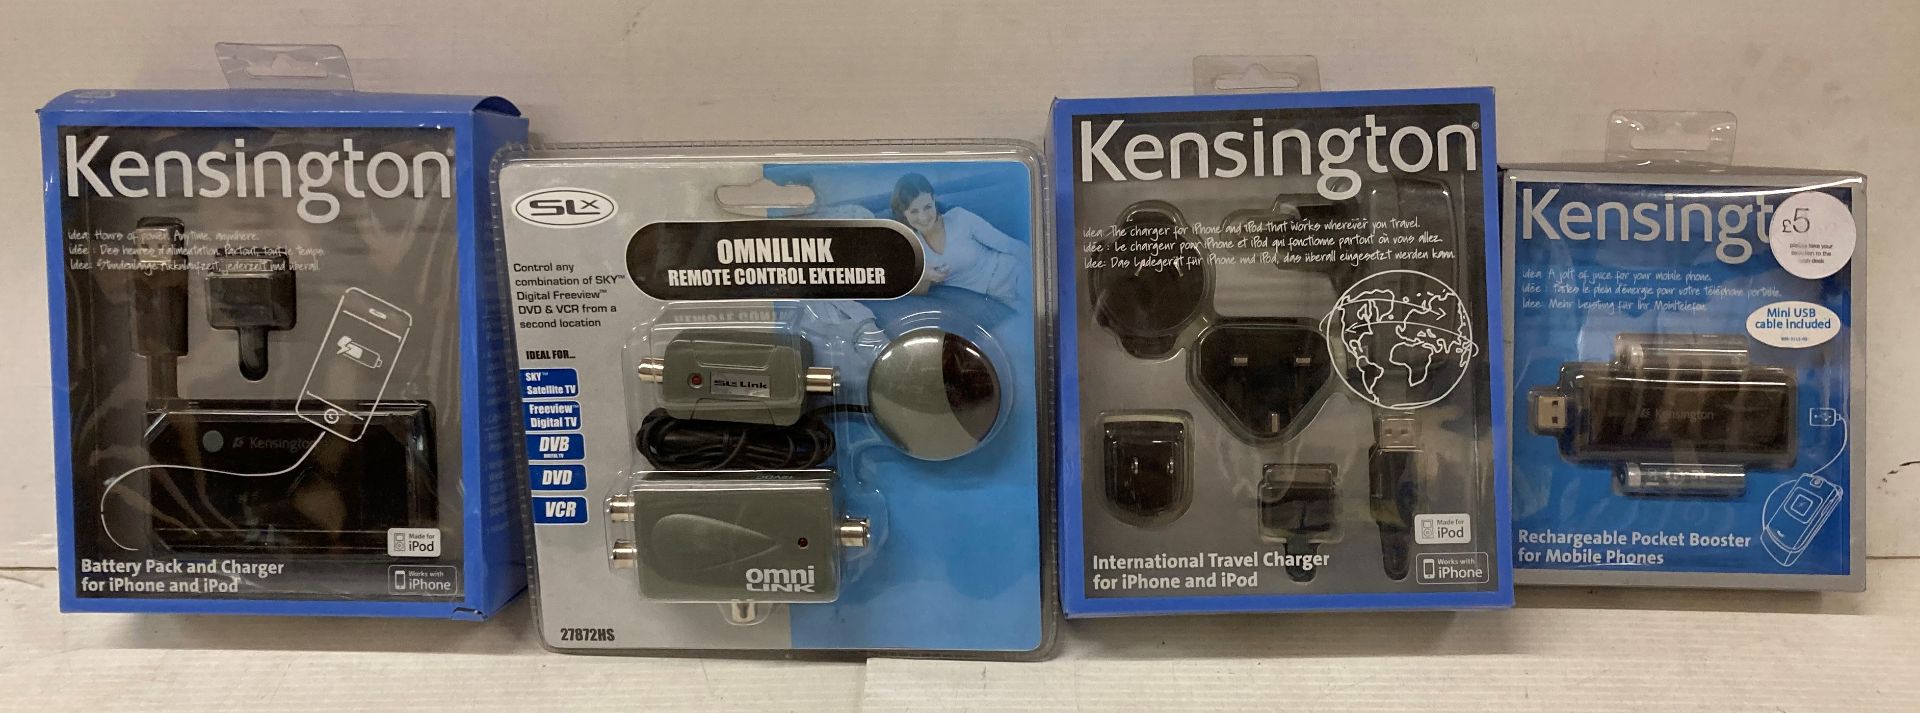 19 x Kensington and Omnlink remote control extenders, battery pack and chargers for iPhone/iPads,